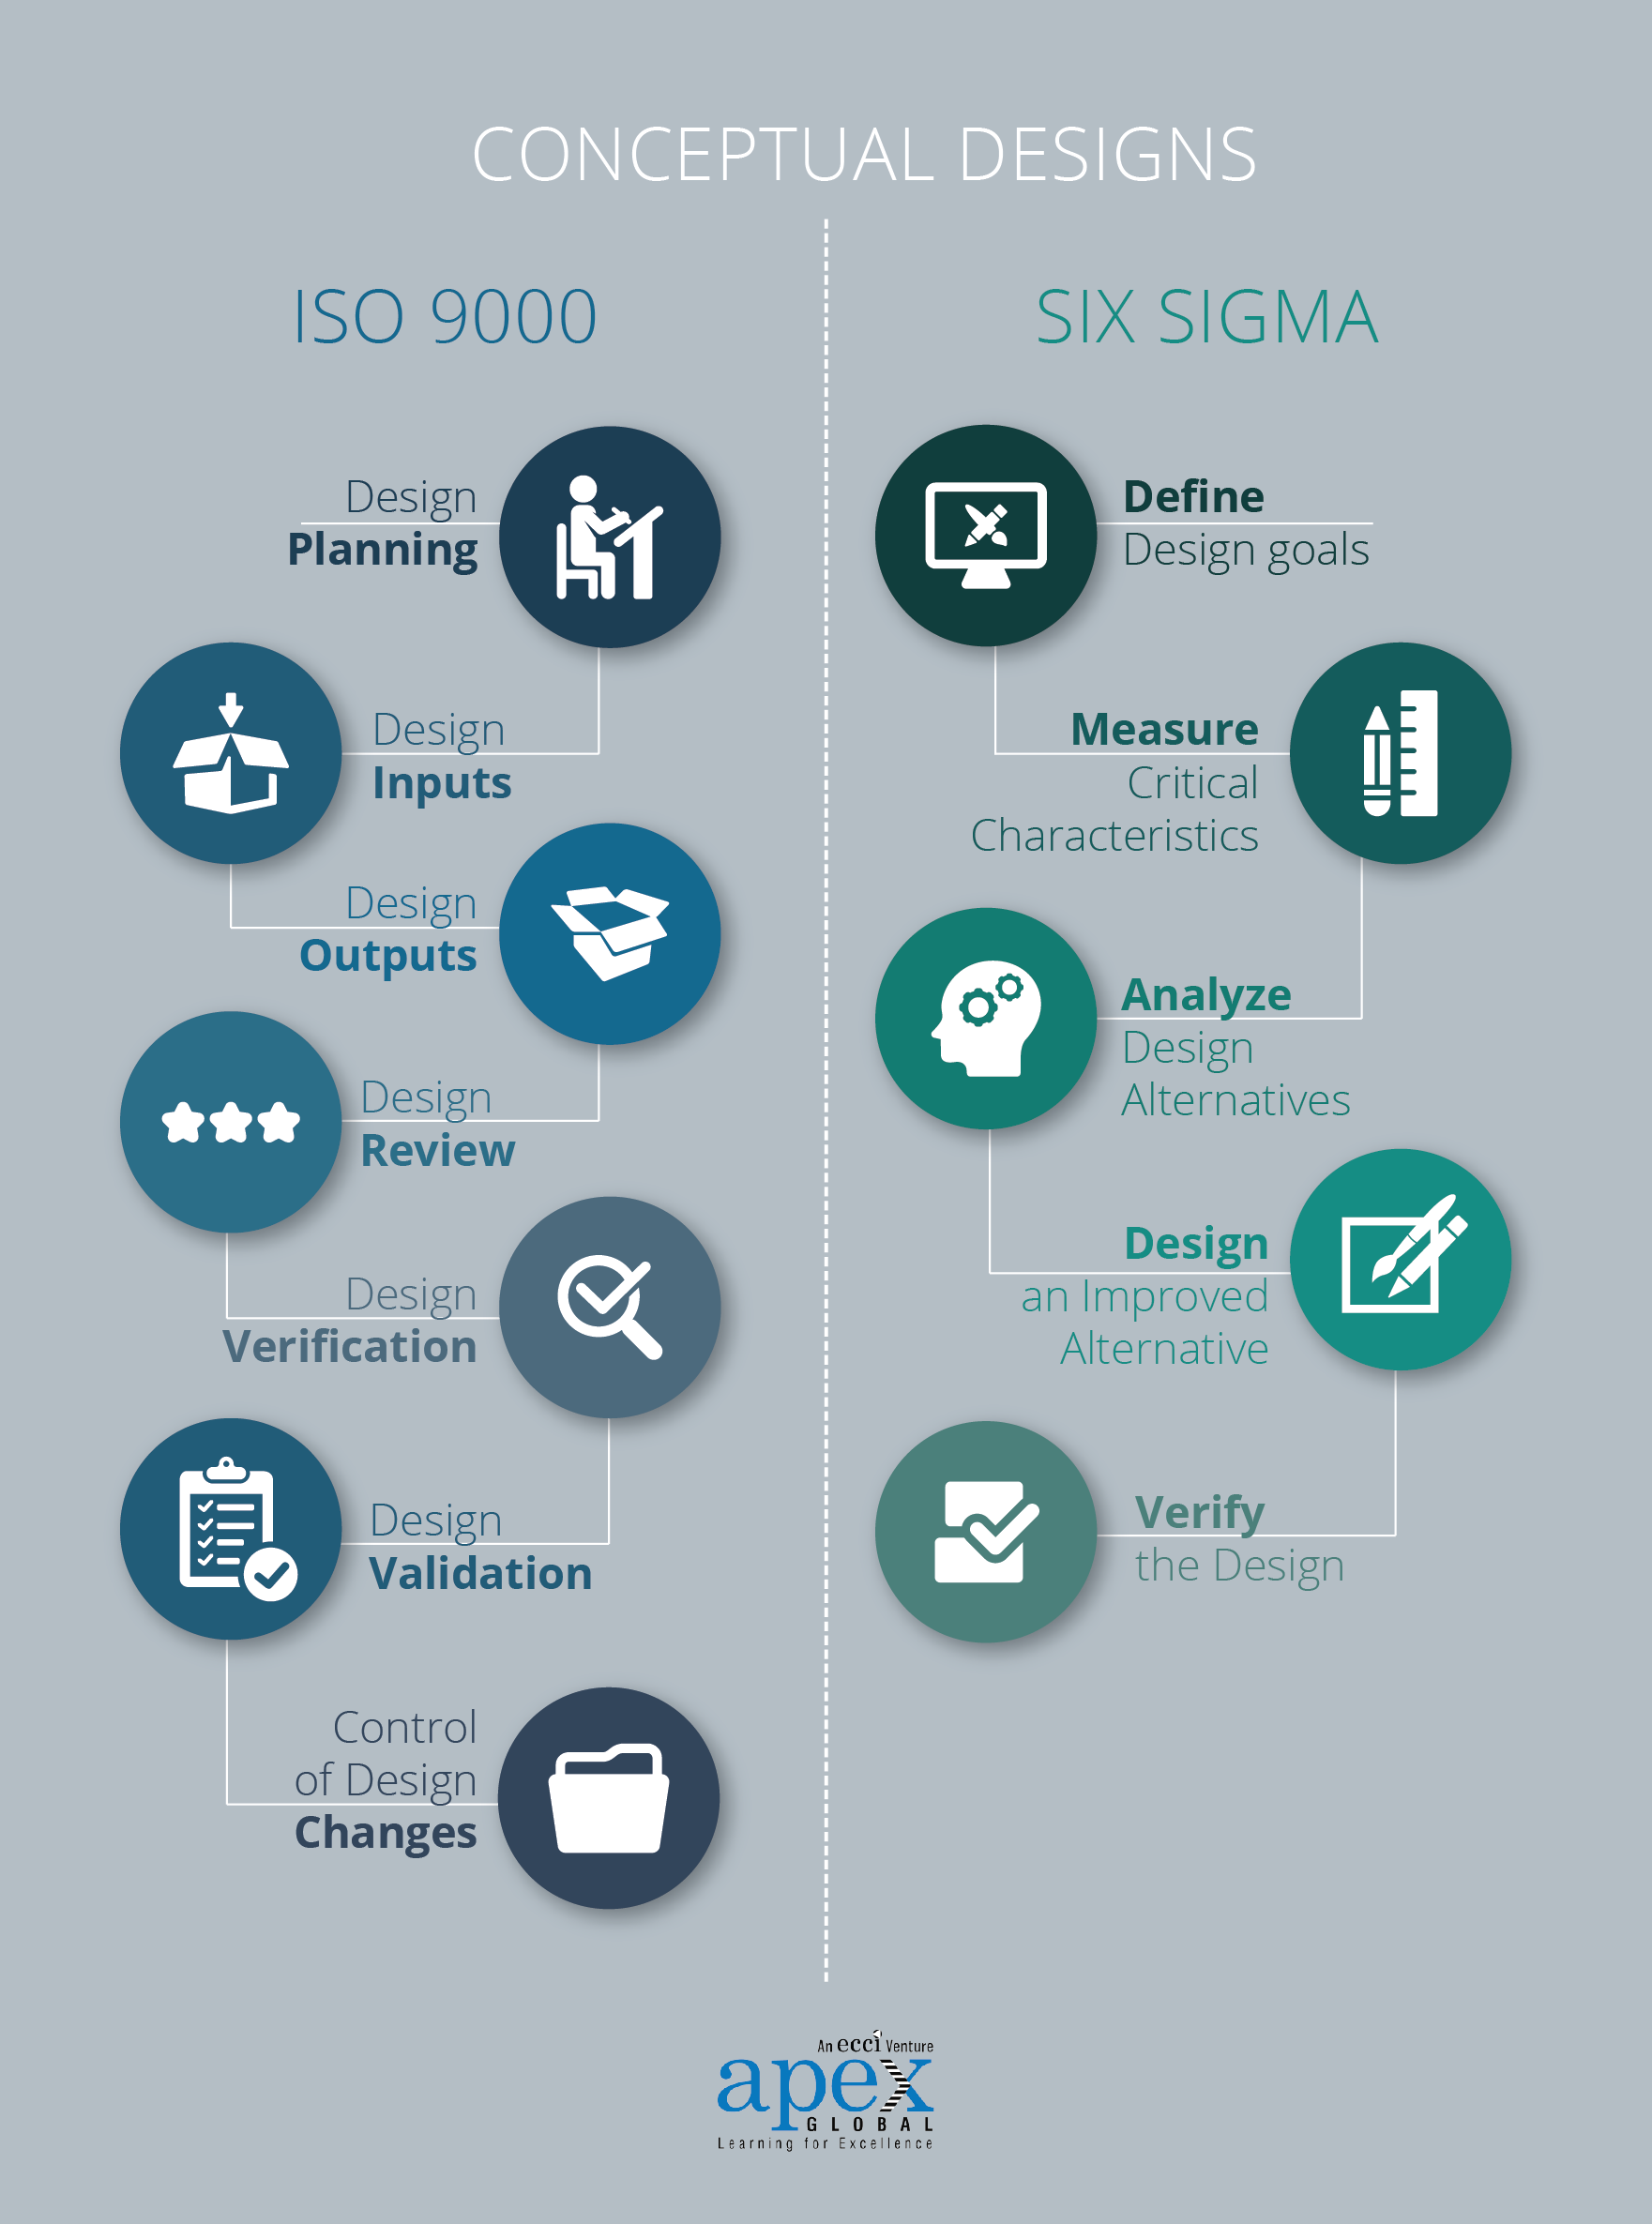 ISO 9001 compared to Six Sigma